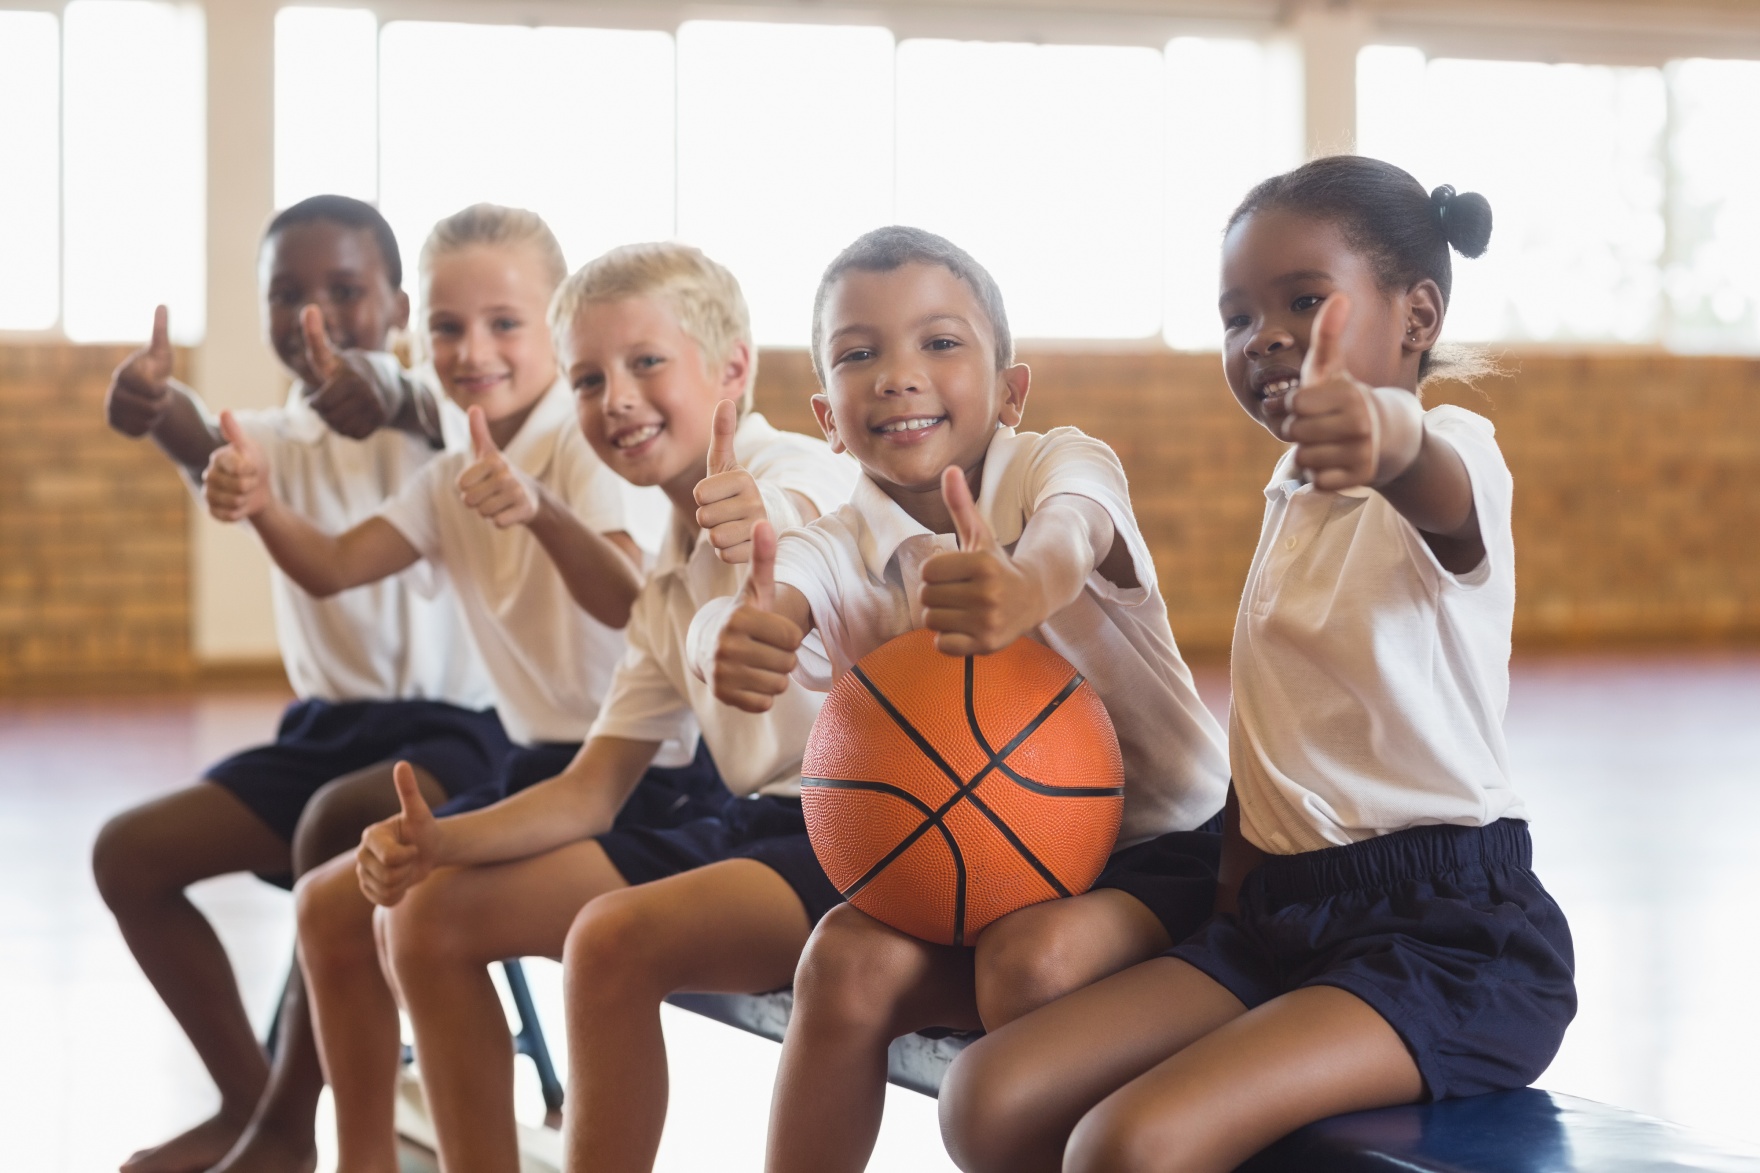 Smiling students with basketball showing thumbs up in school gym